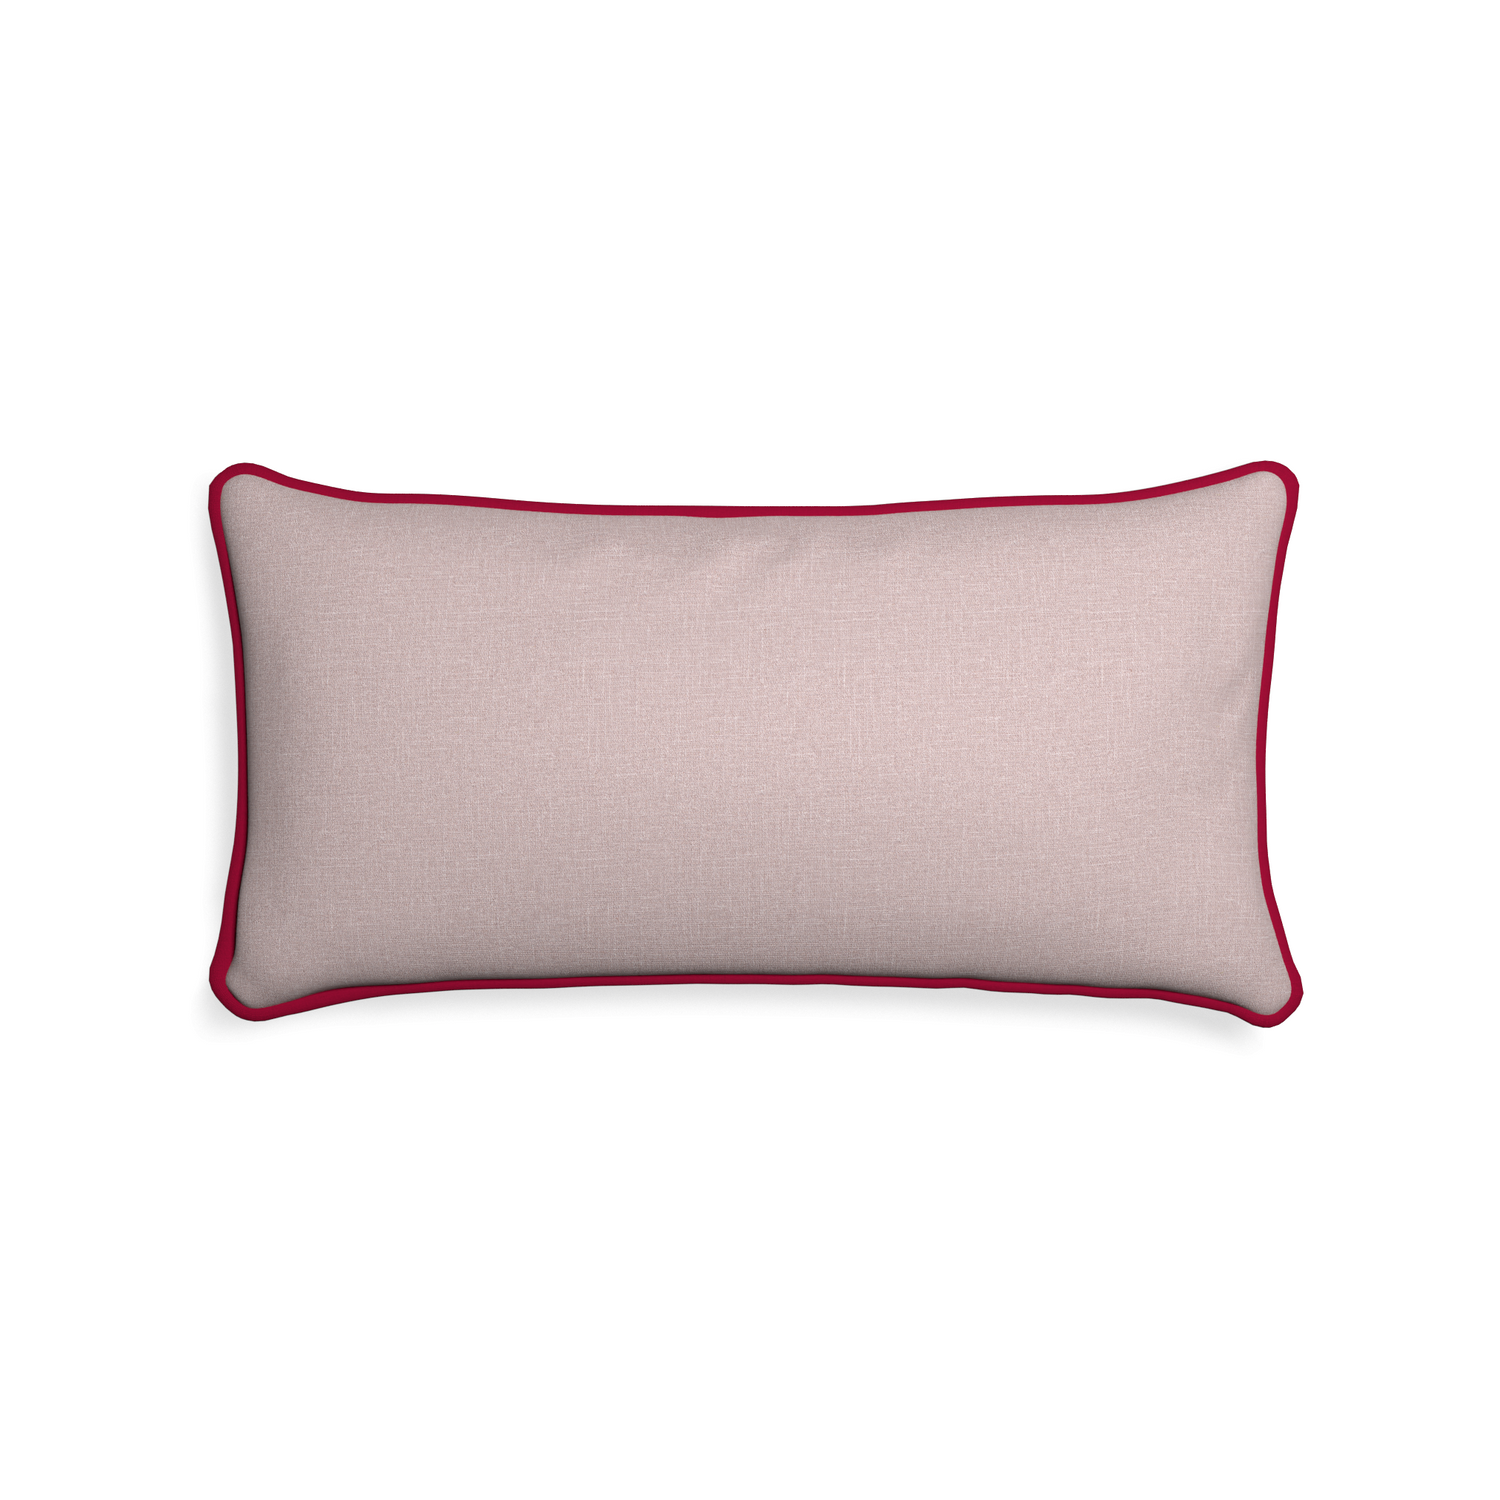 Midi-lumbar orchid custom mauve pinkpillow with raspberry piping on white background